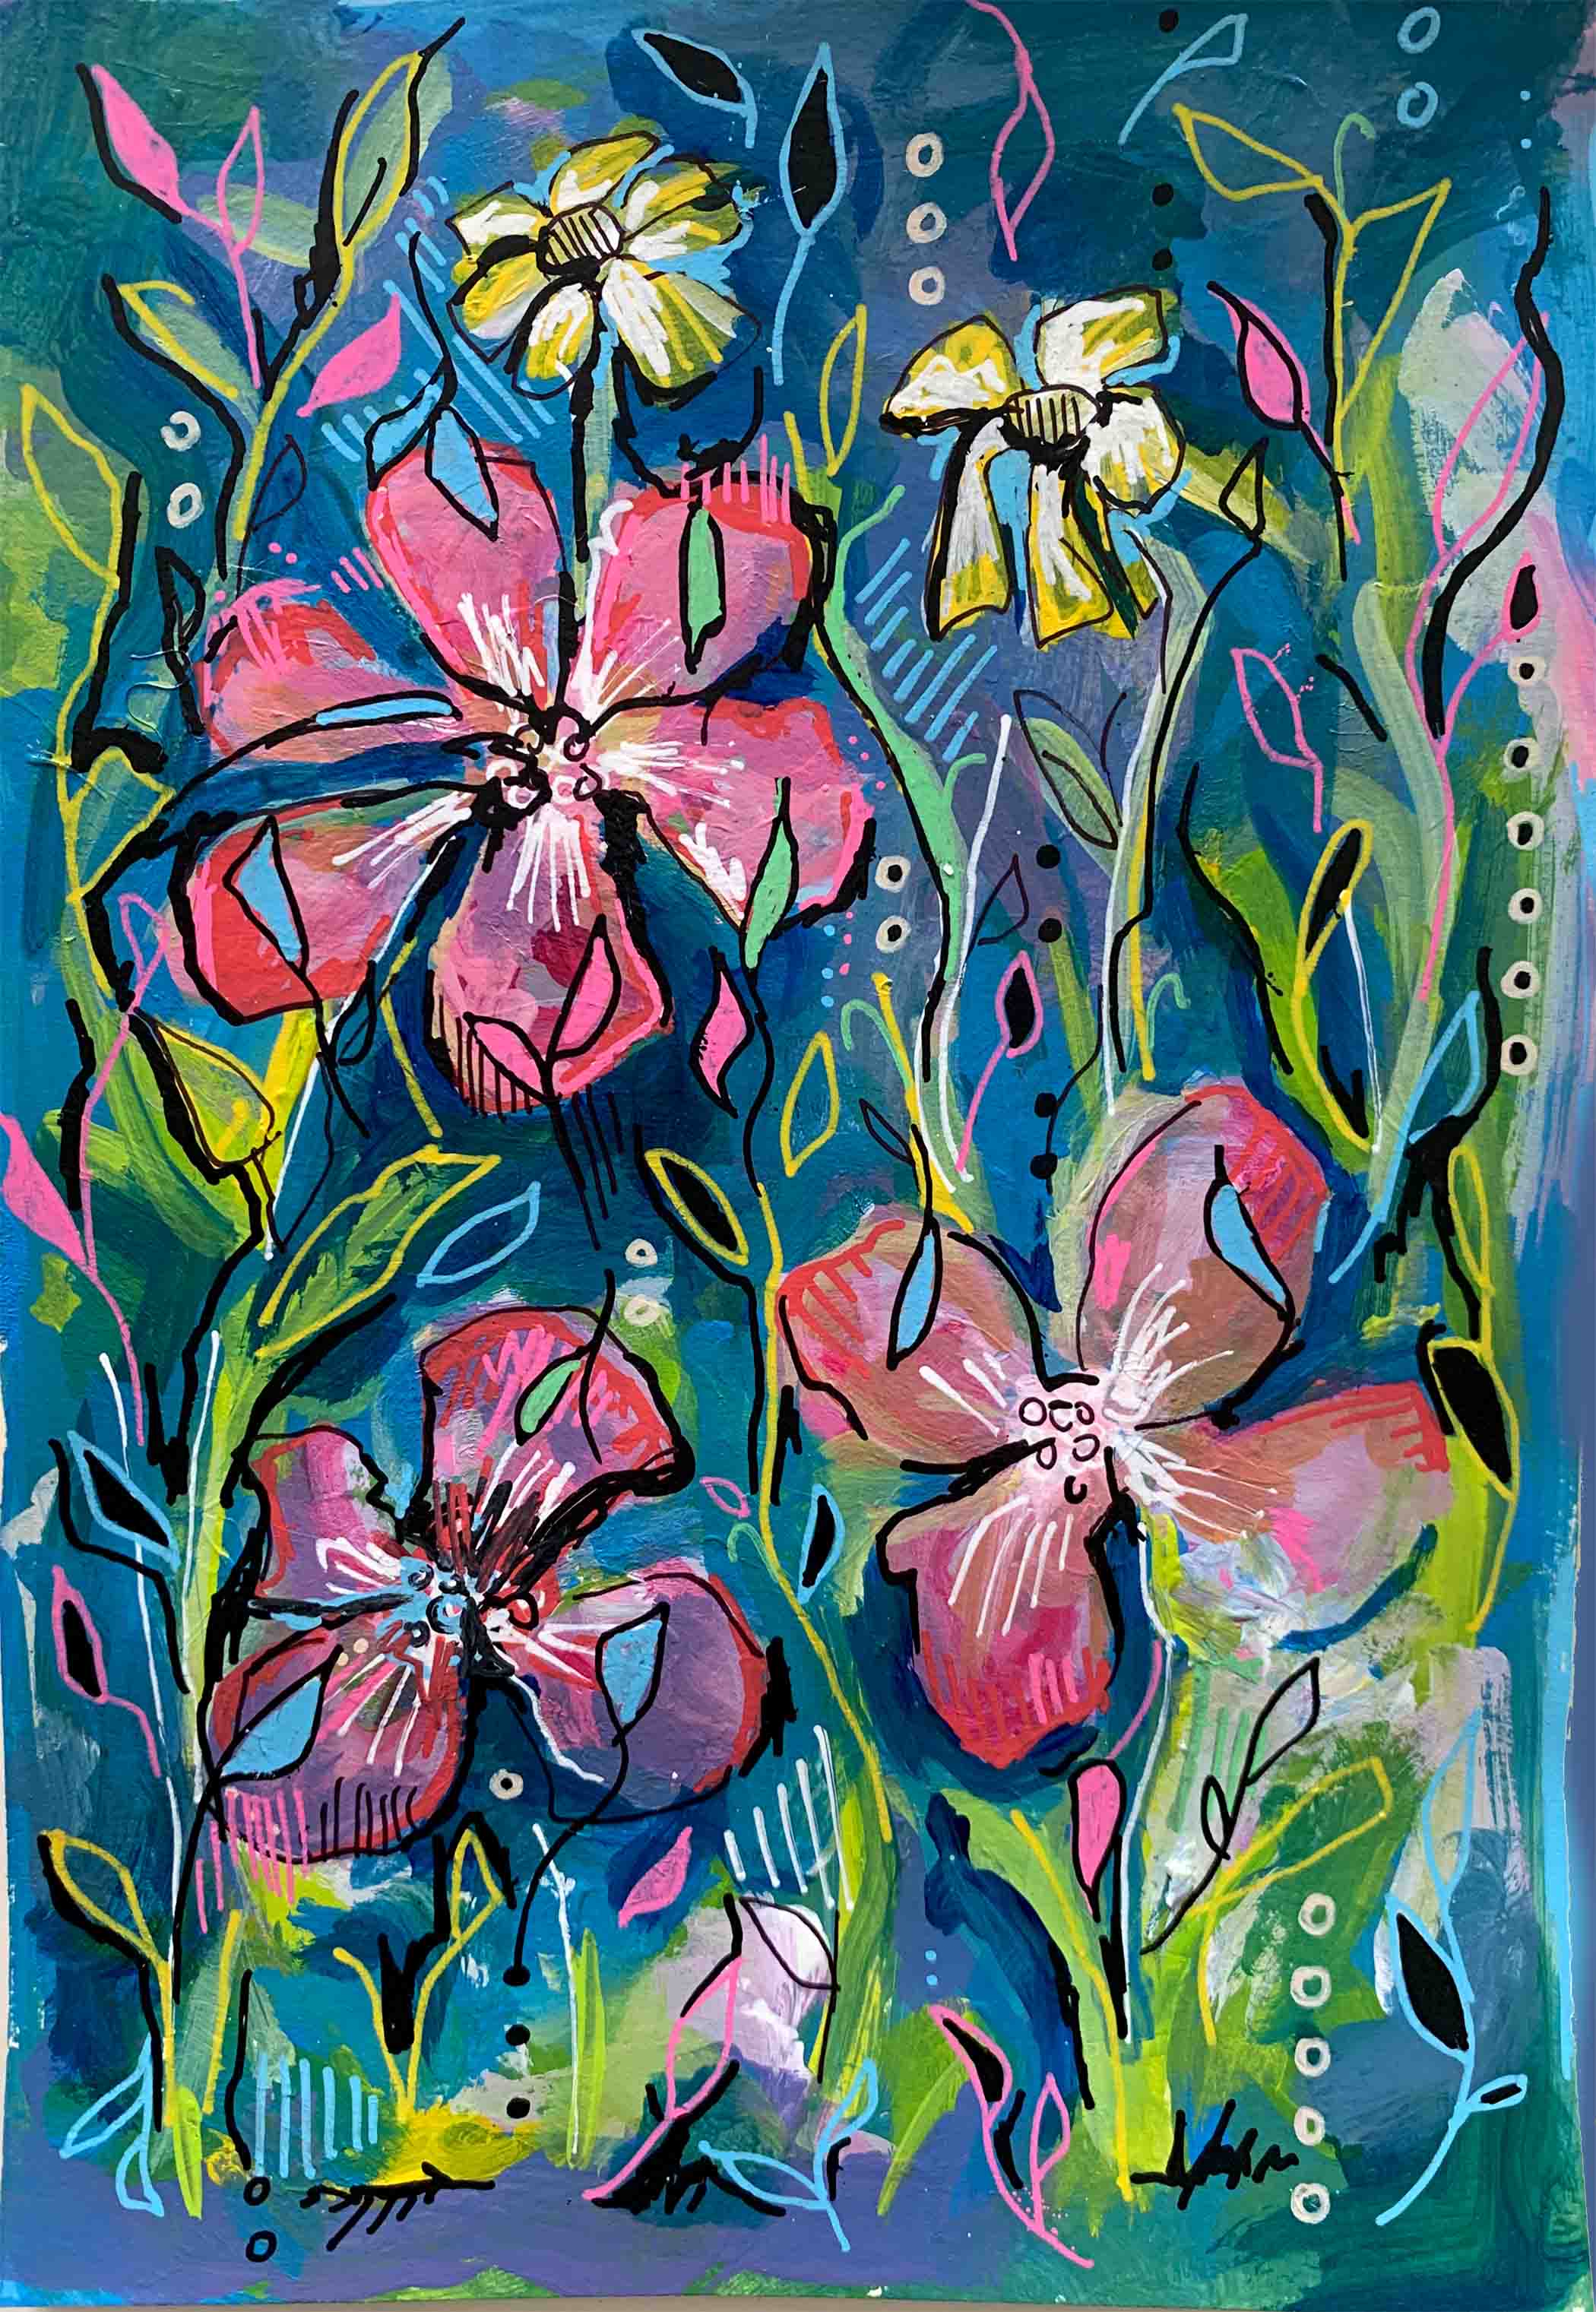 art every day number 610 garden under sea flowers paint illustration